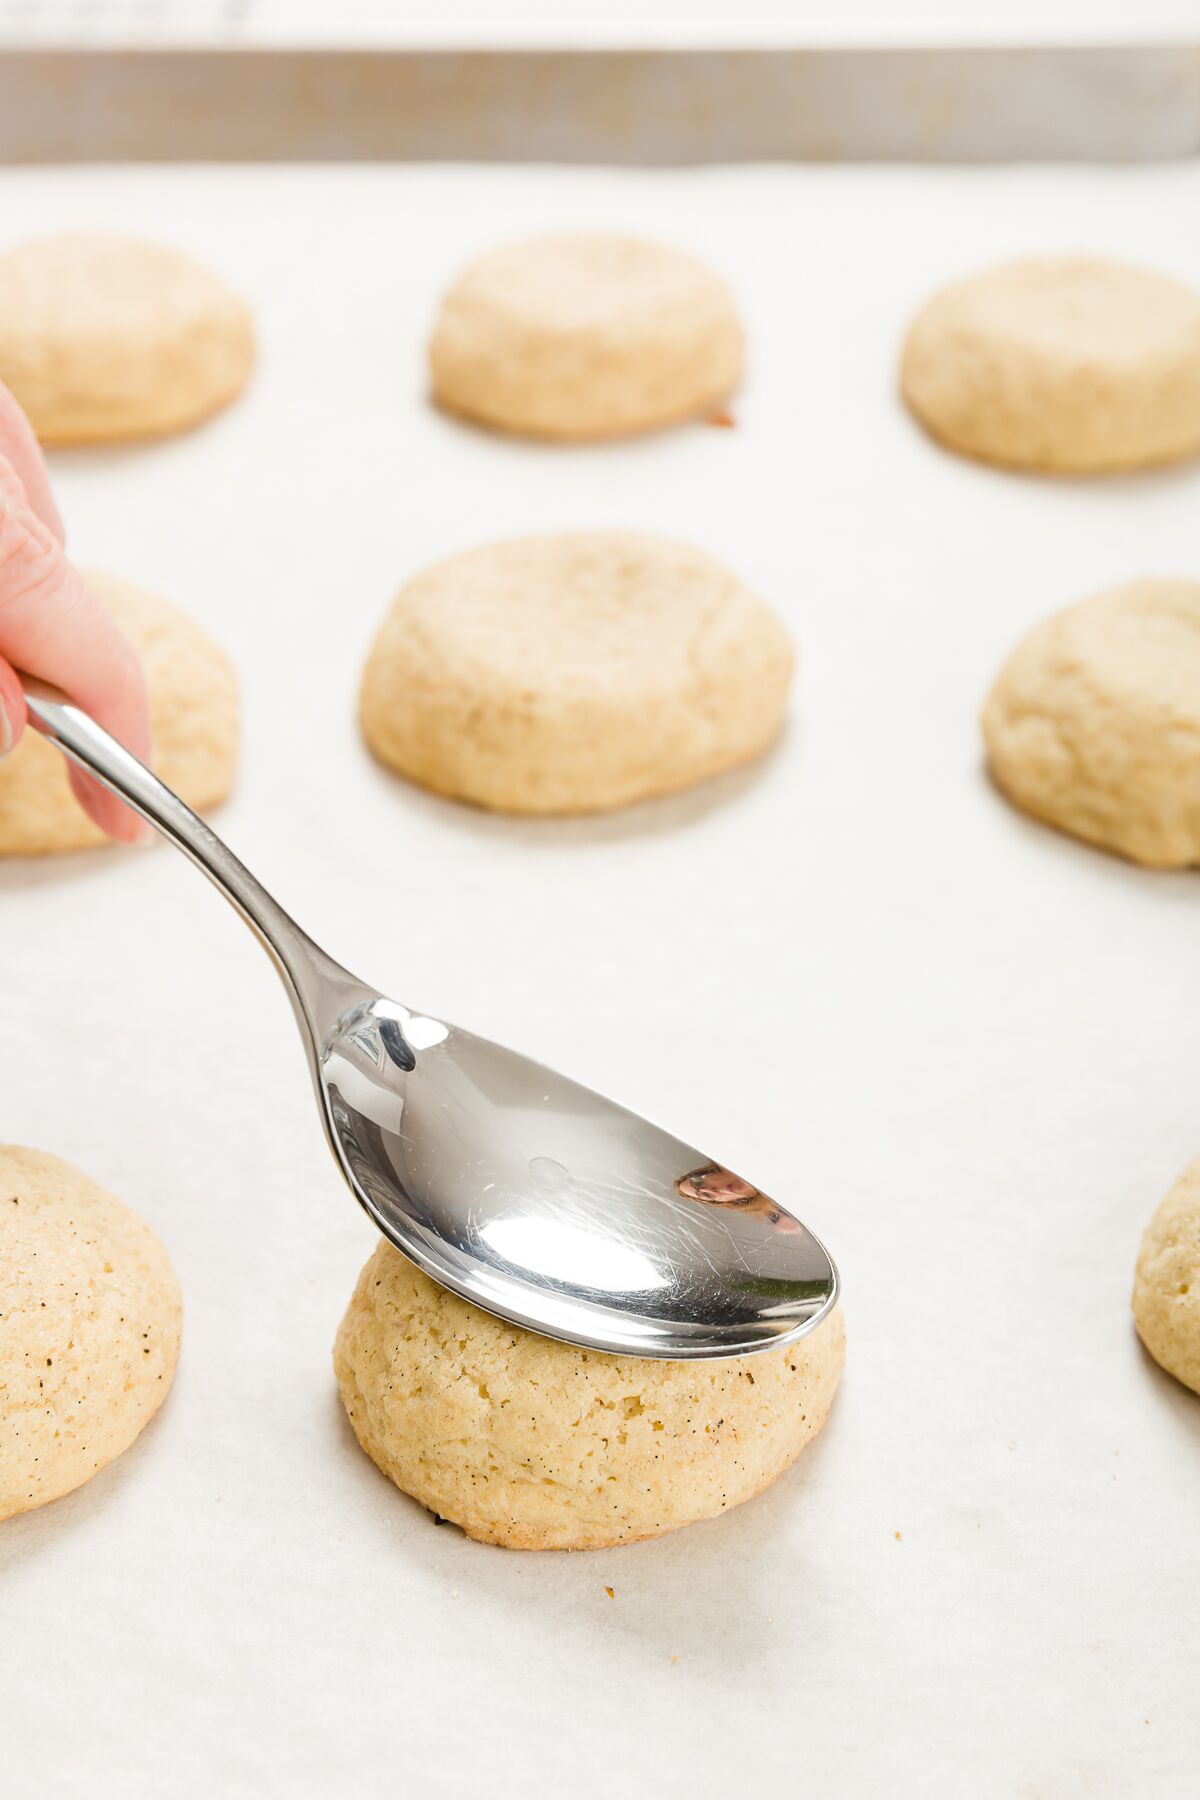 Pressing the center of a cookie down with a spoon